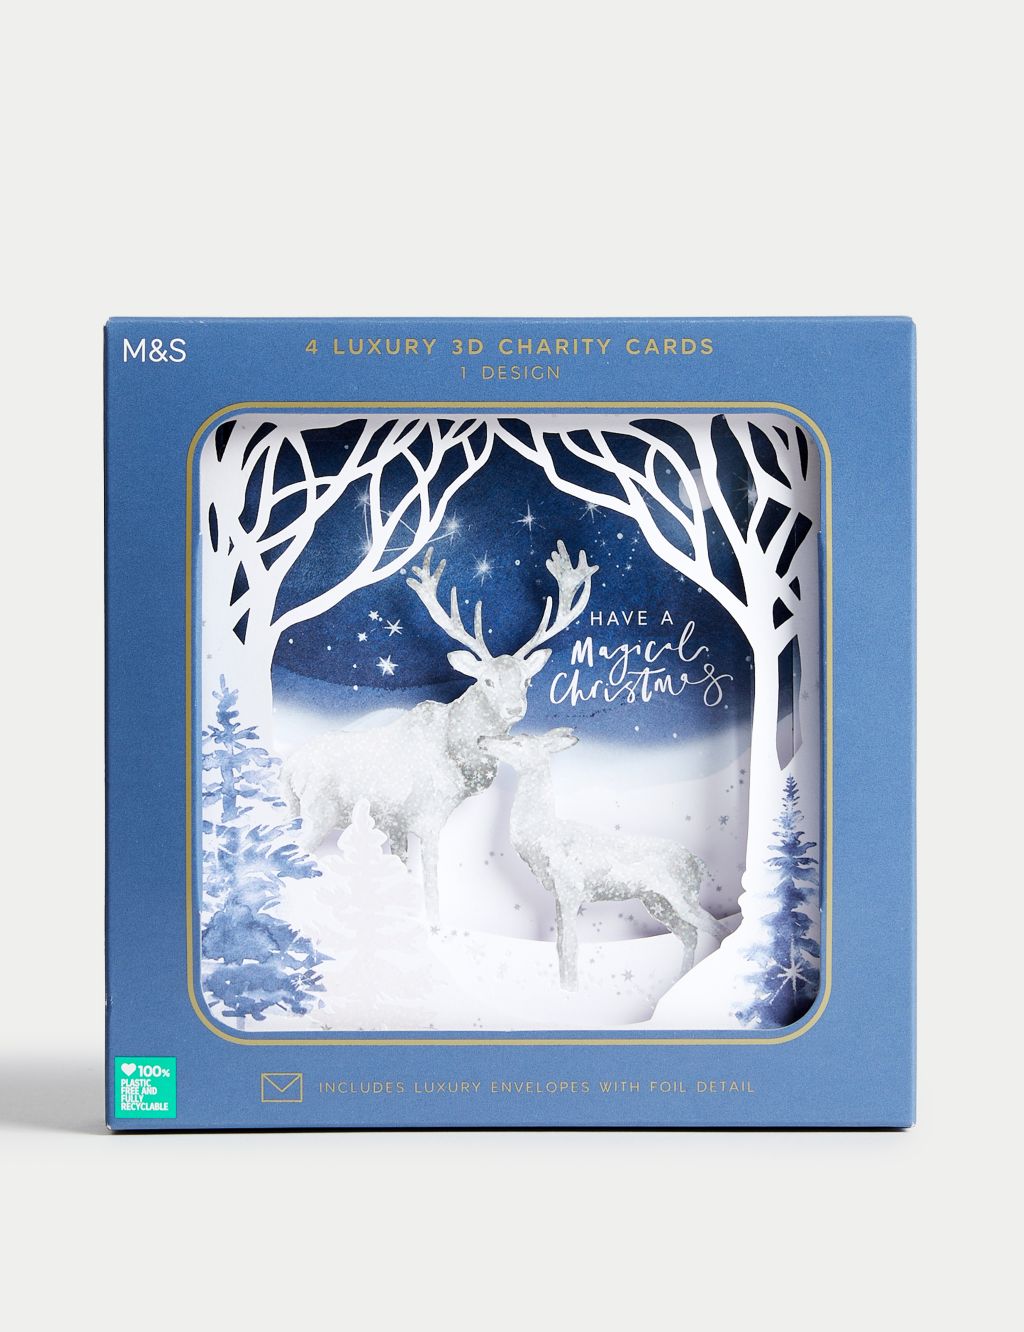 Luxury Charity Christmas Cards - 3D Stag Design